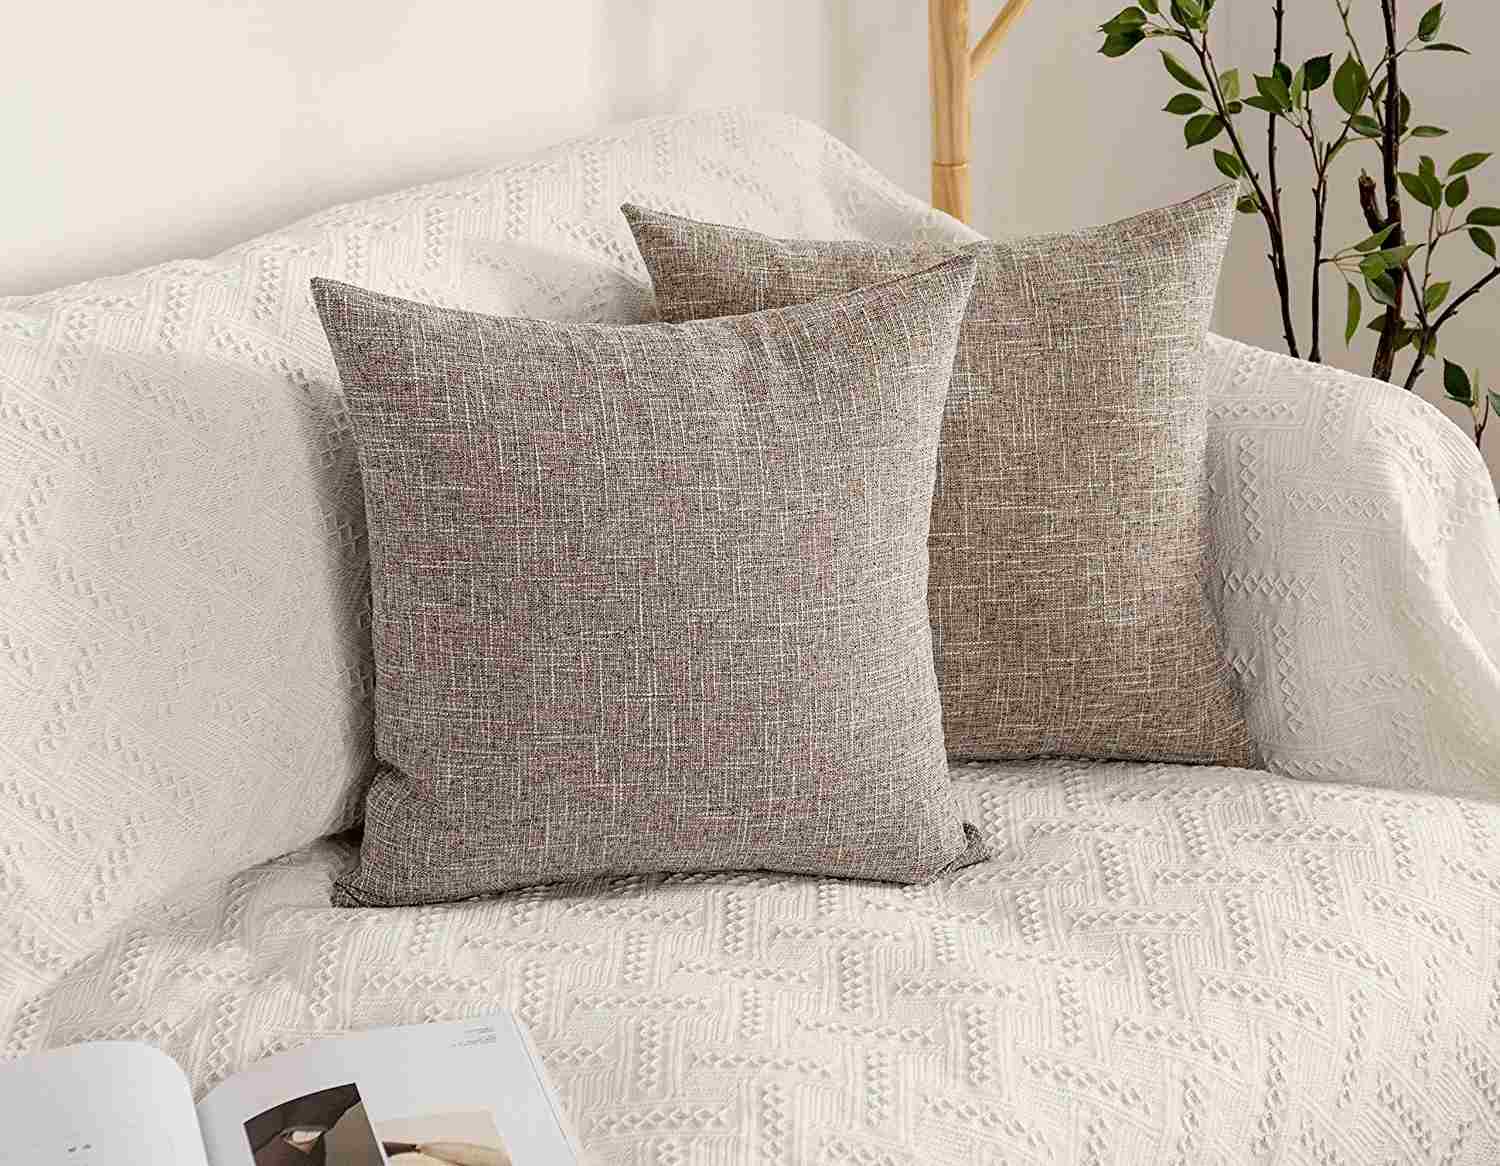 7 Stylish And Comfortable Bedding Items